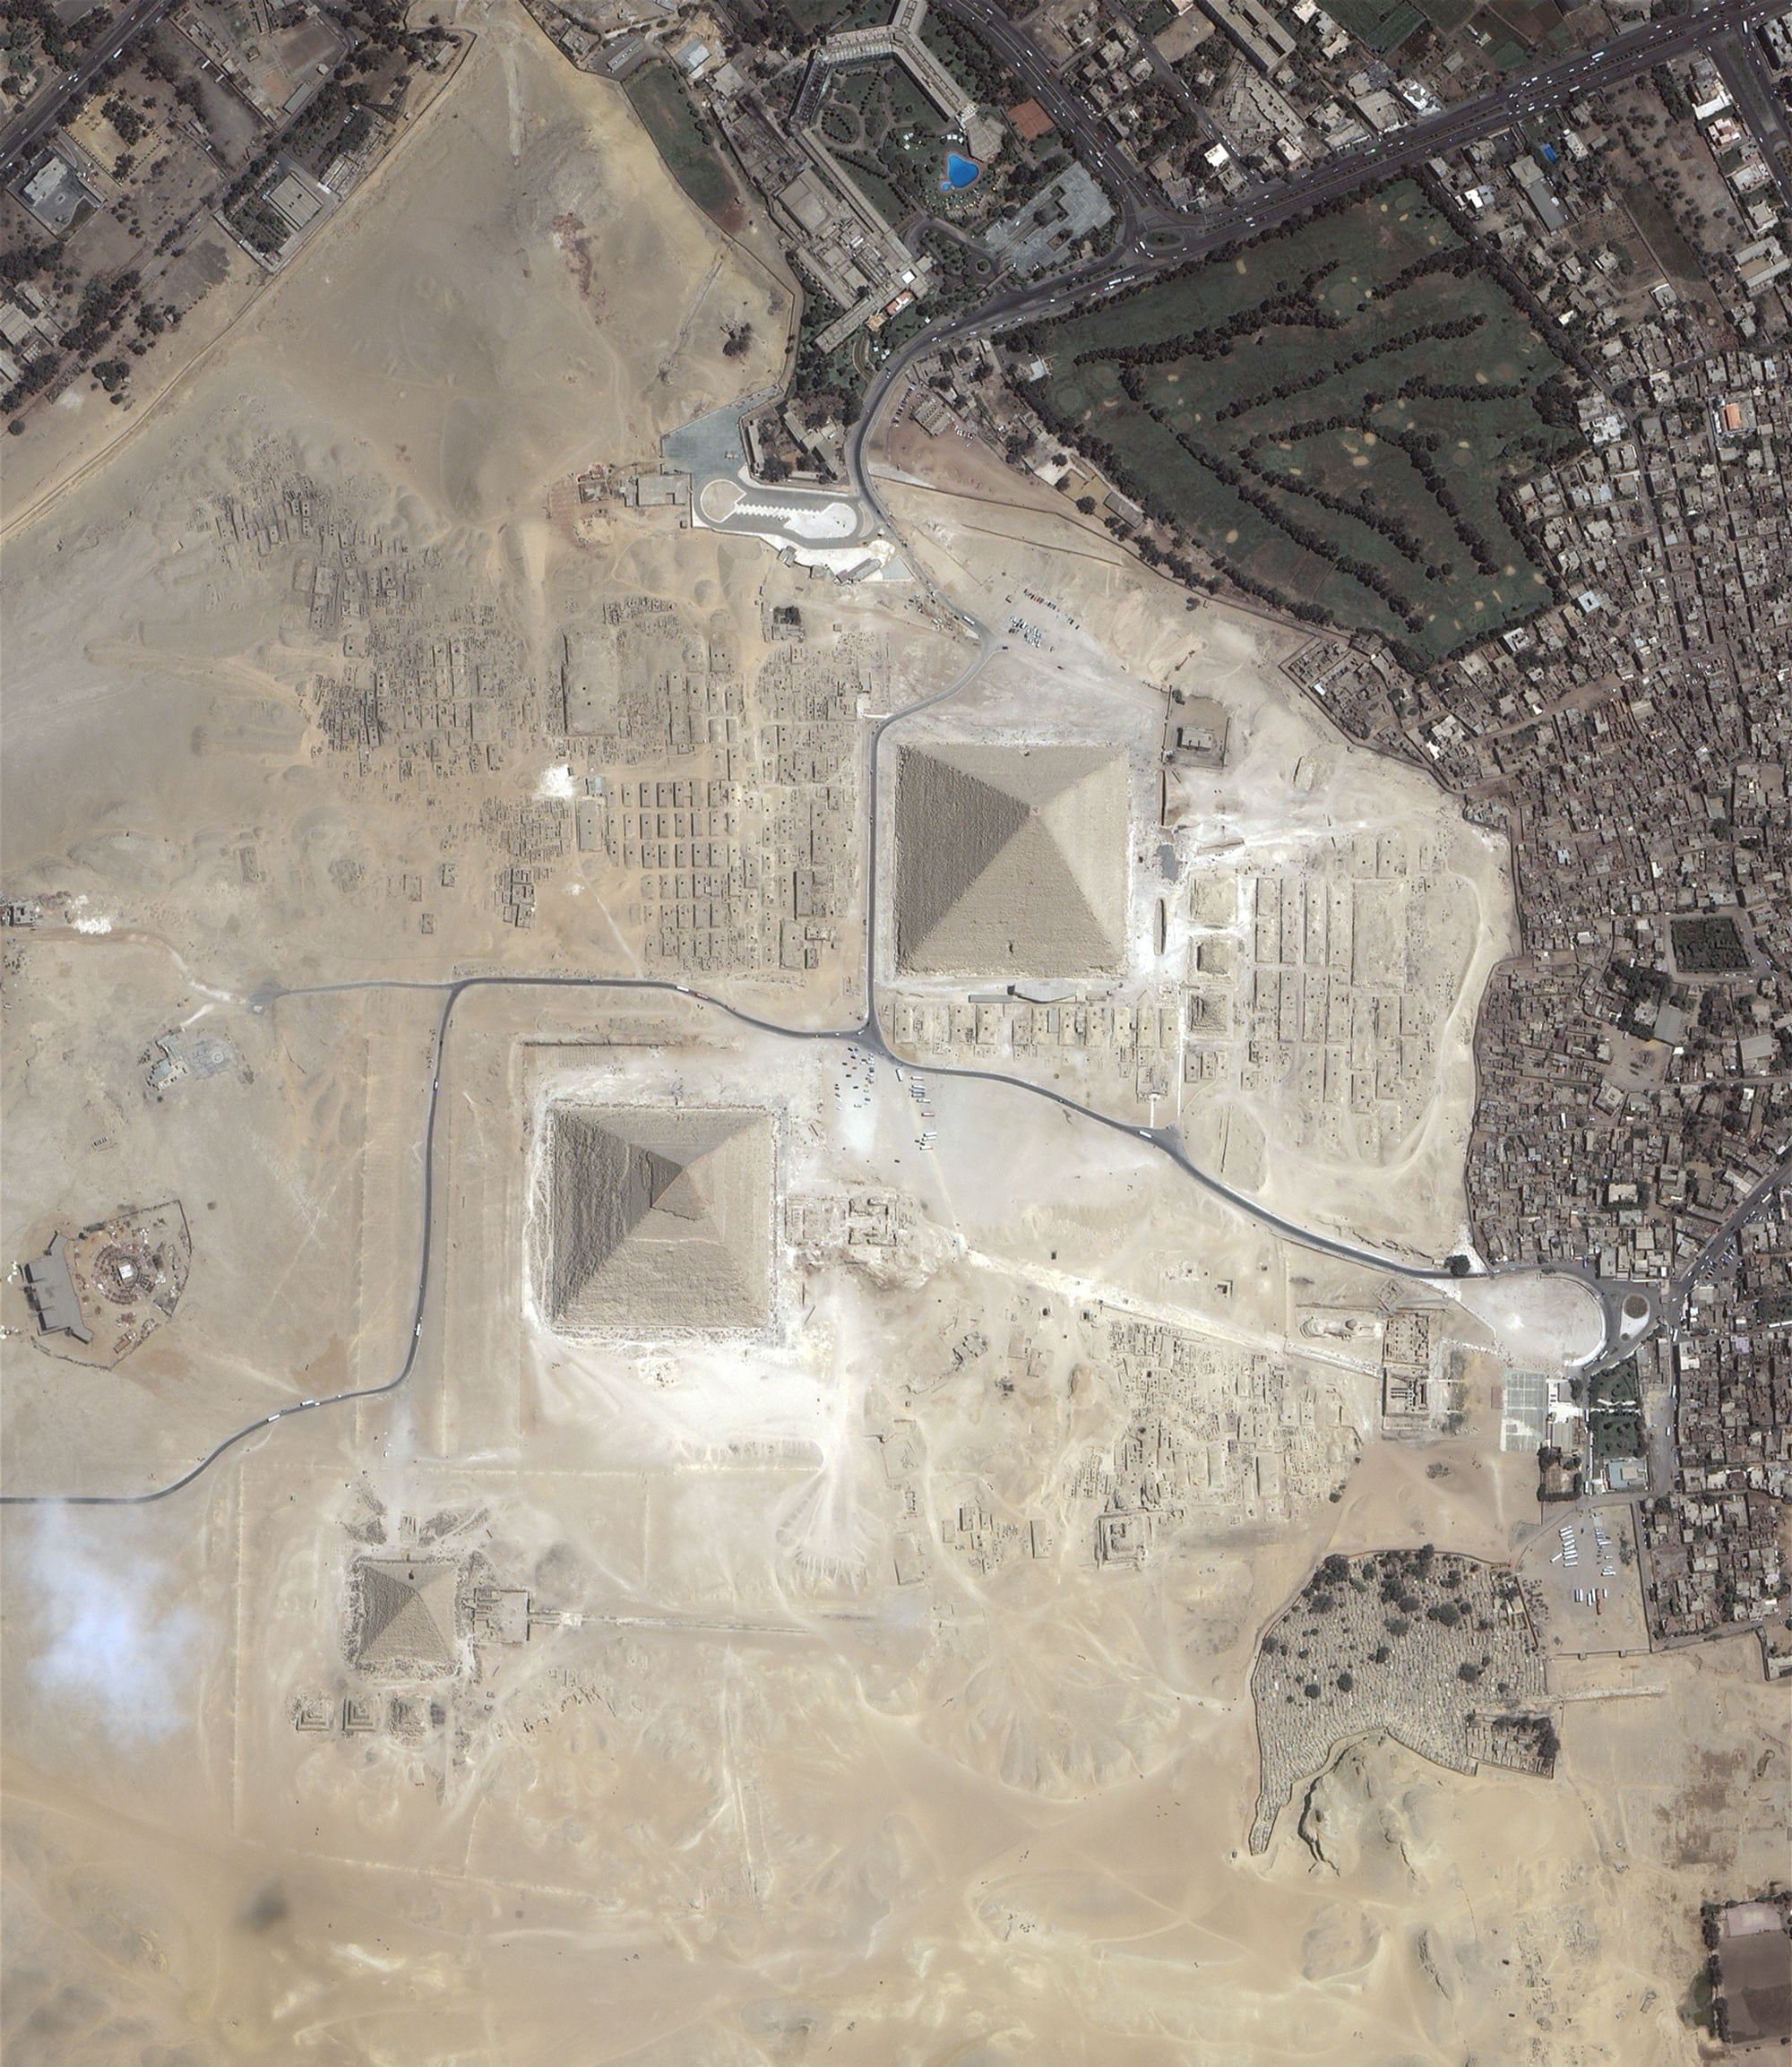 aerial view of pyramid and land, Pyramids of Giza, Egypt, architecture